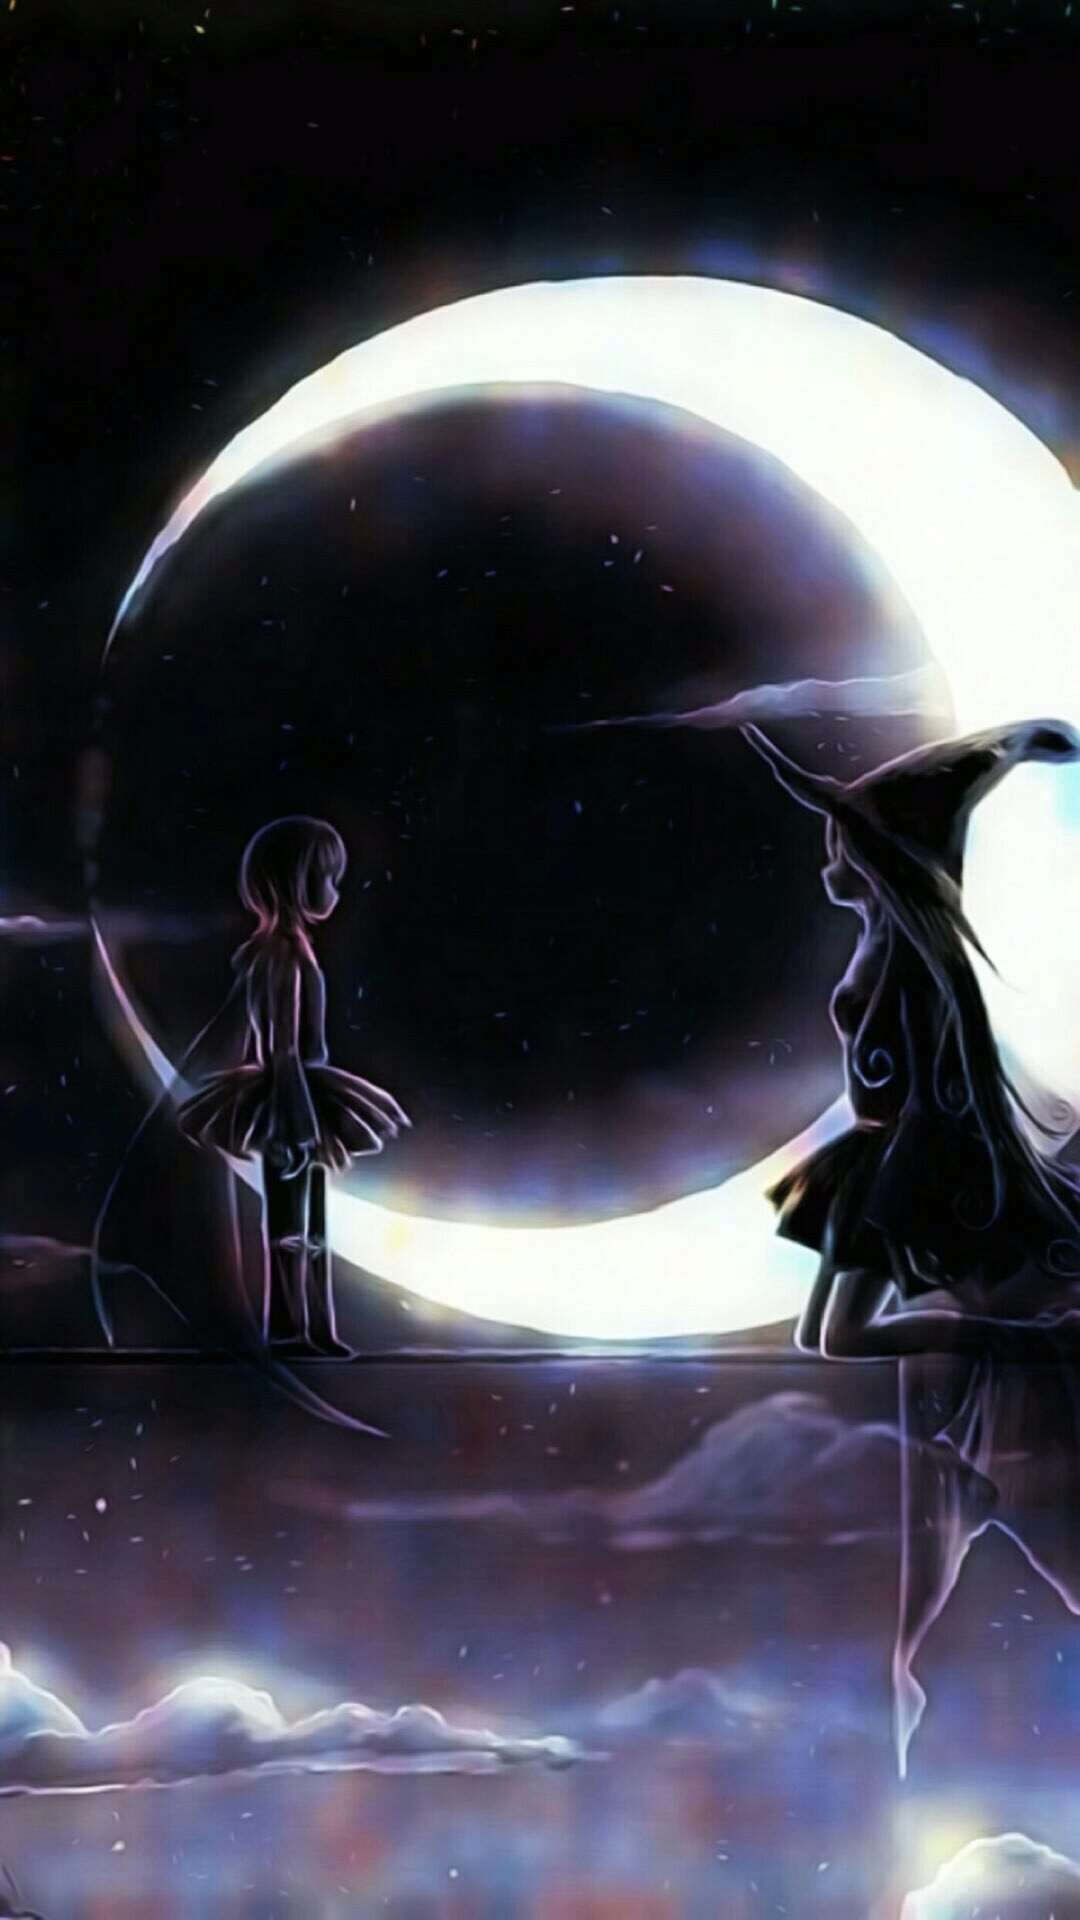 Witch Moon | wallpaper.sc SmartPhone